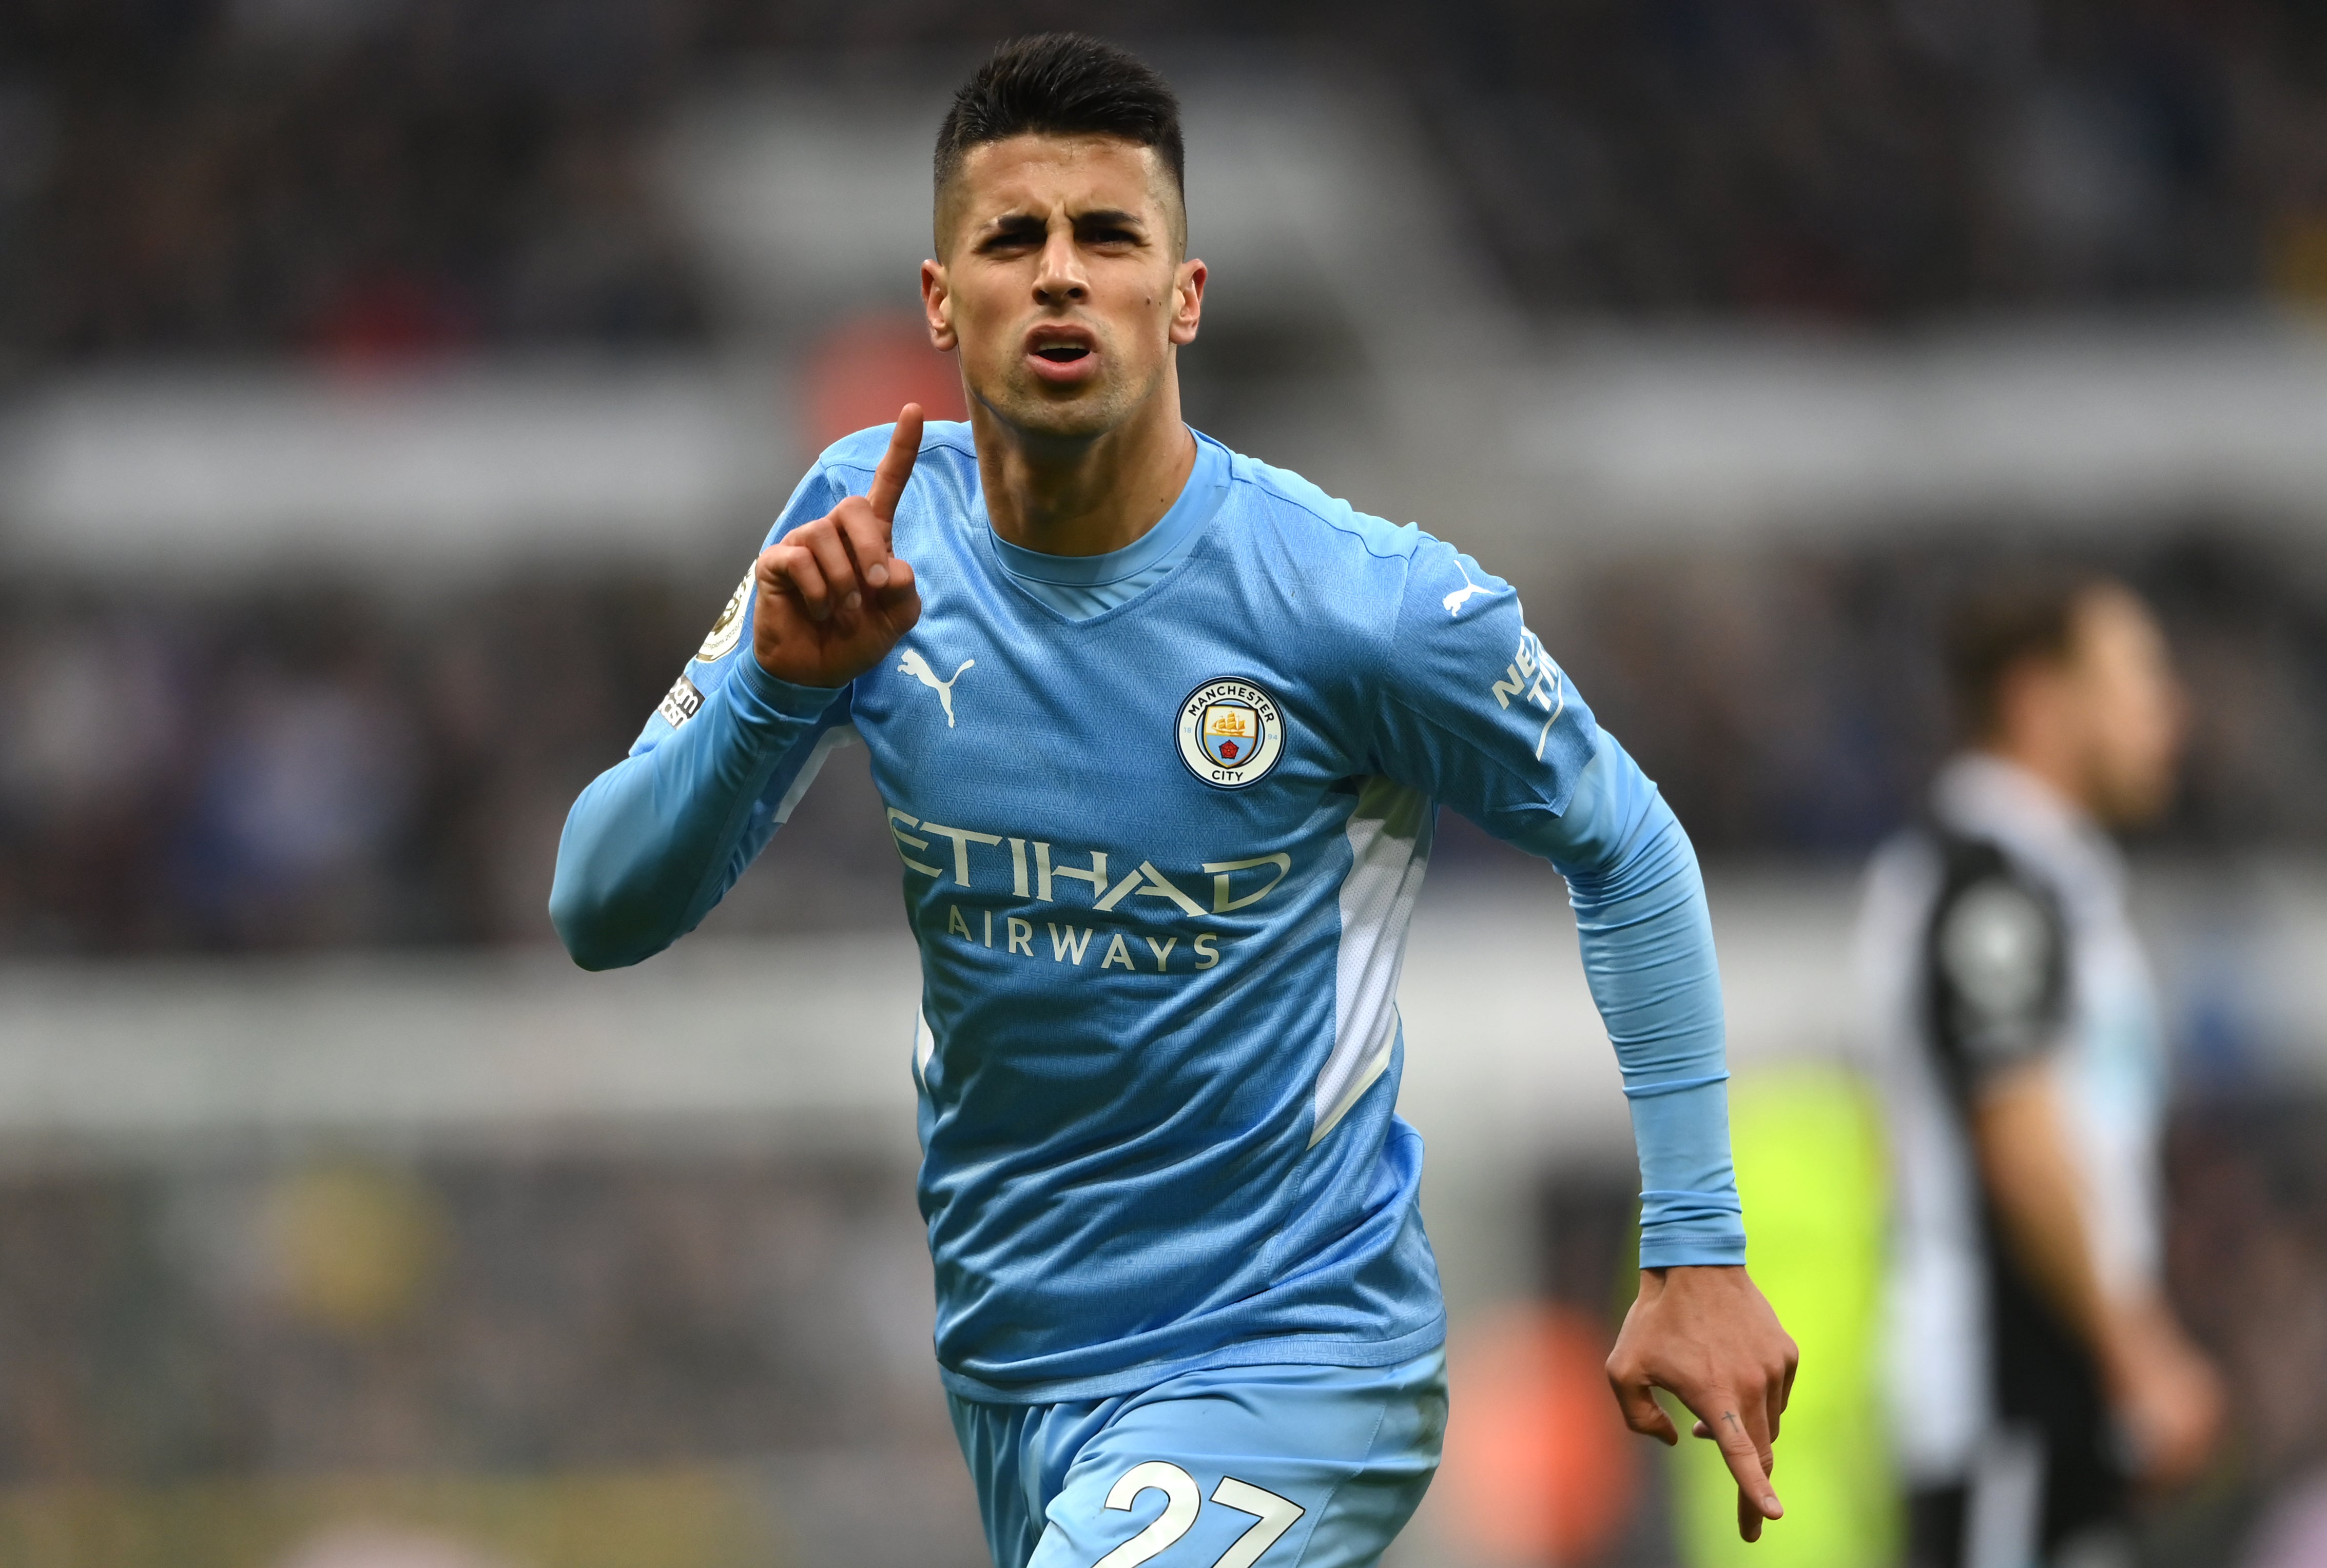 Joao Cancelo has made five assists in the Premier League this season